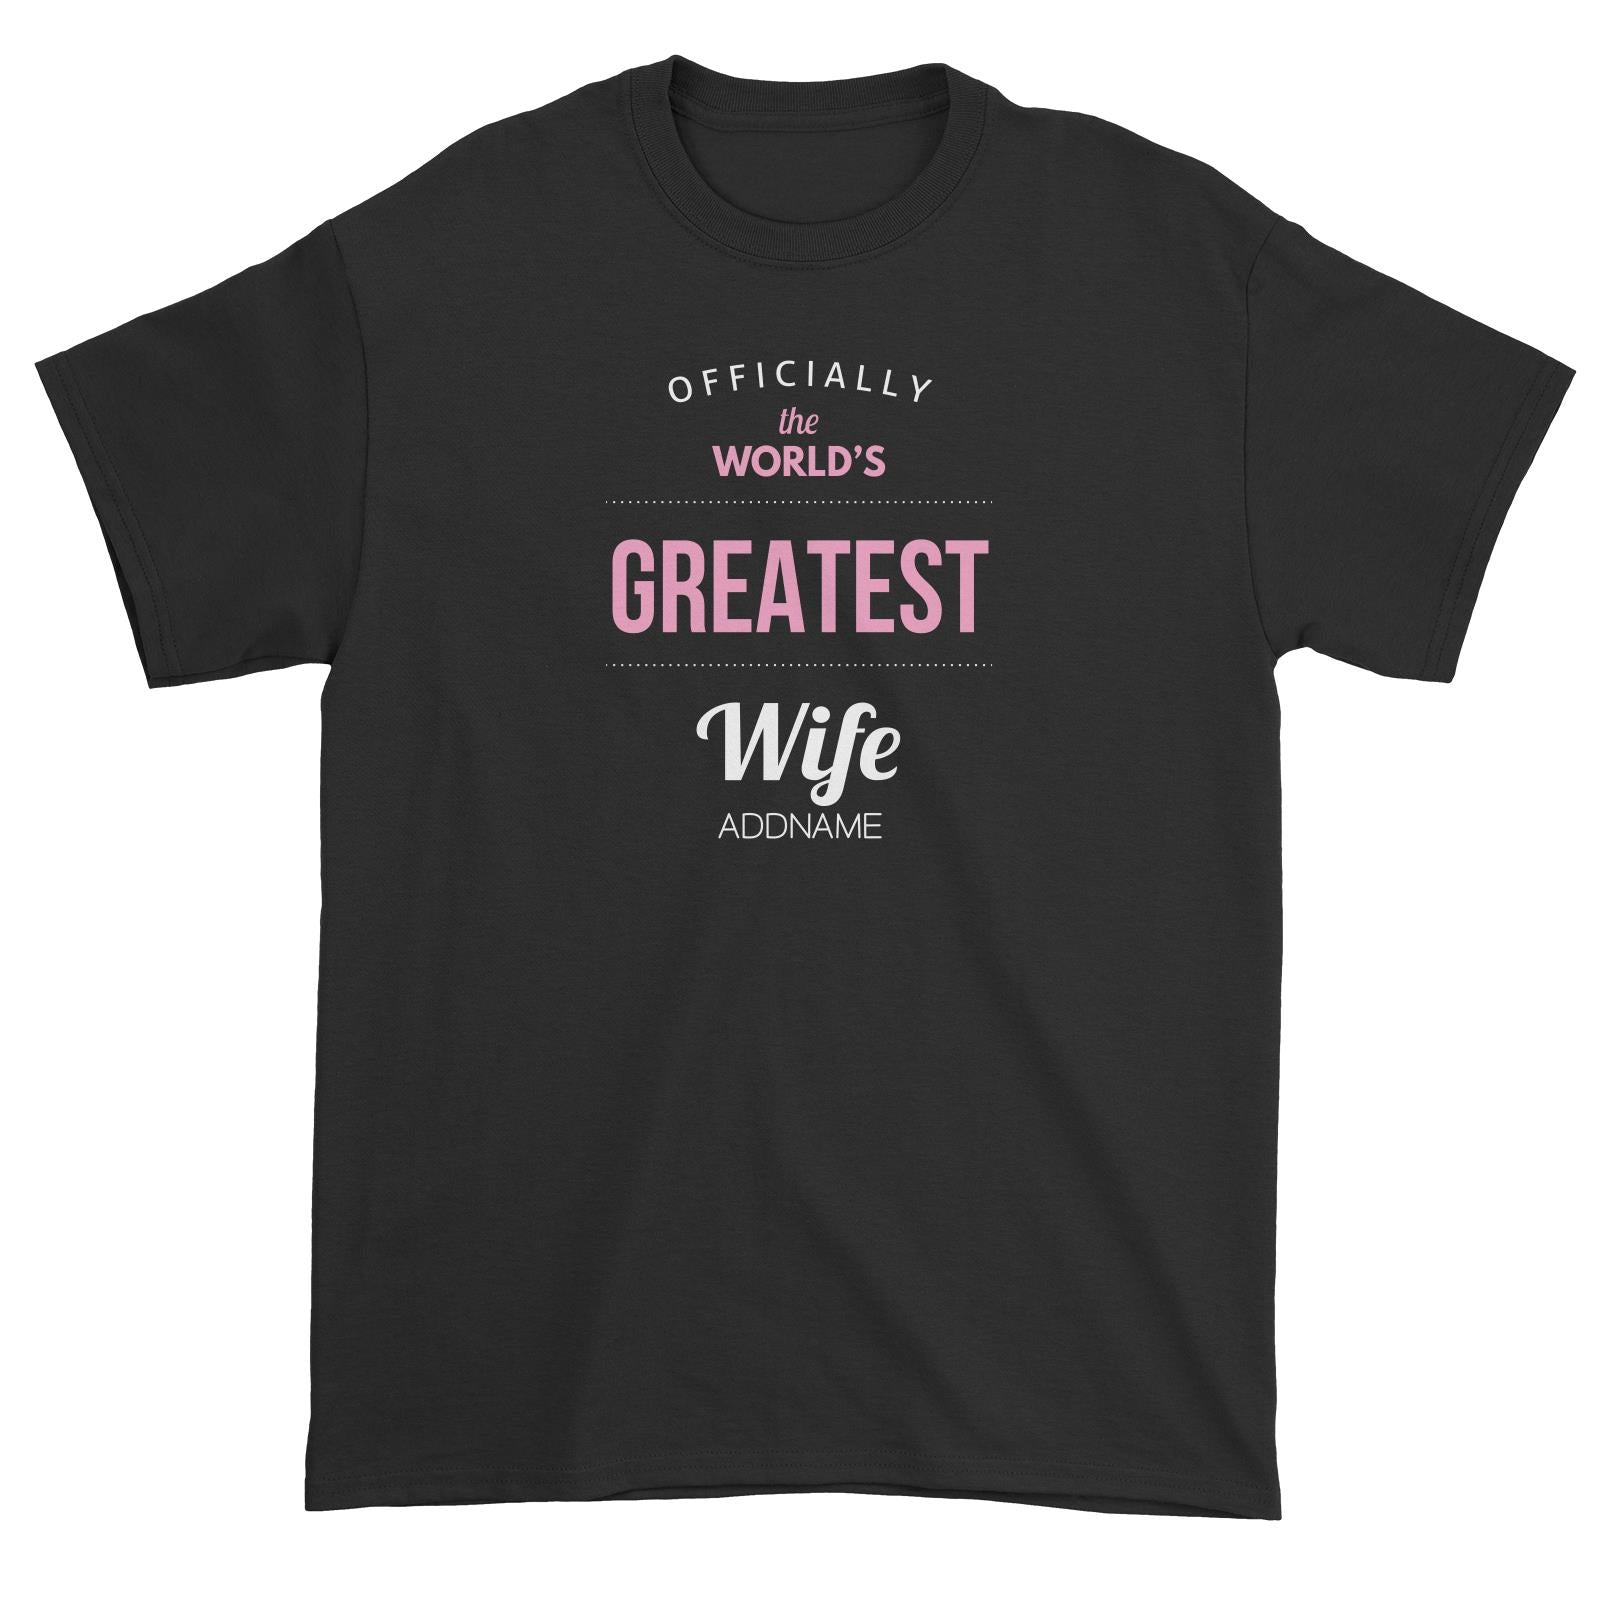 Husband and Wife Officially The World's Geatest Wife Addname Unisex T-Shirt